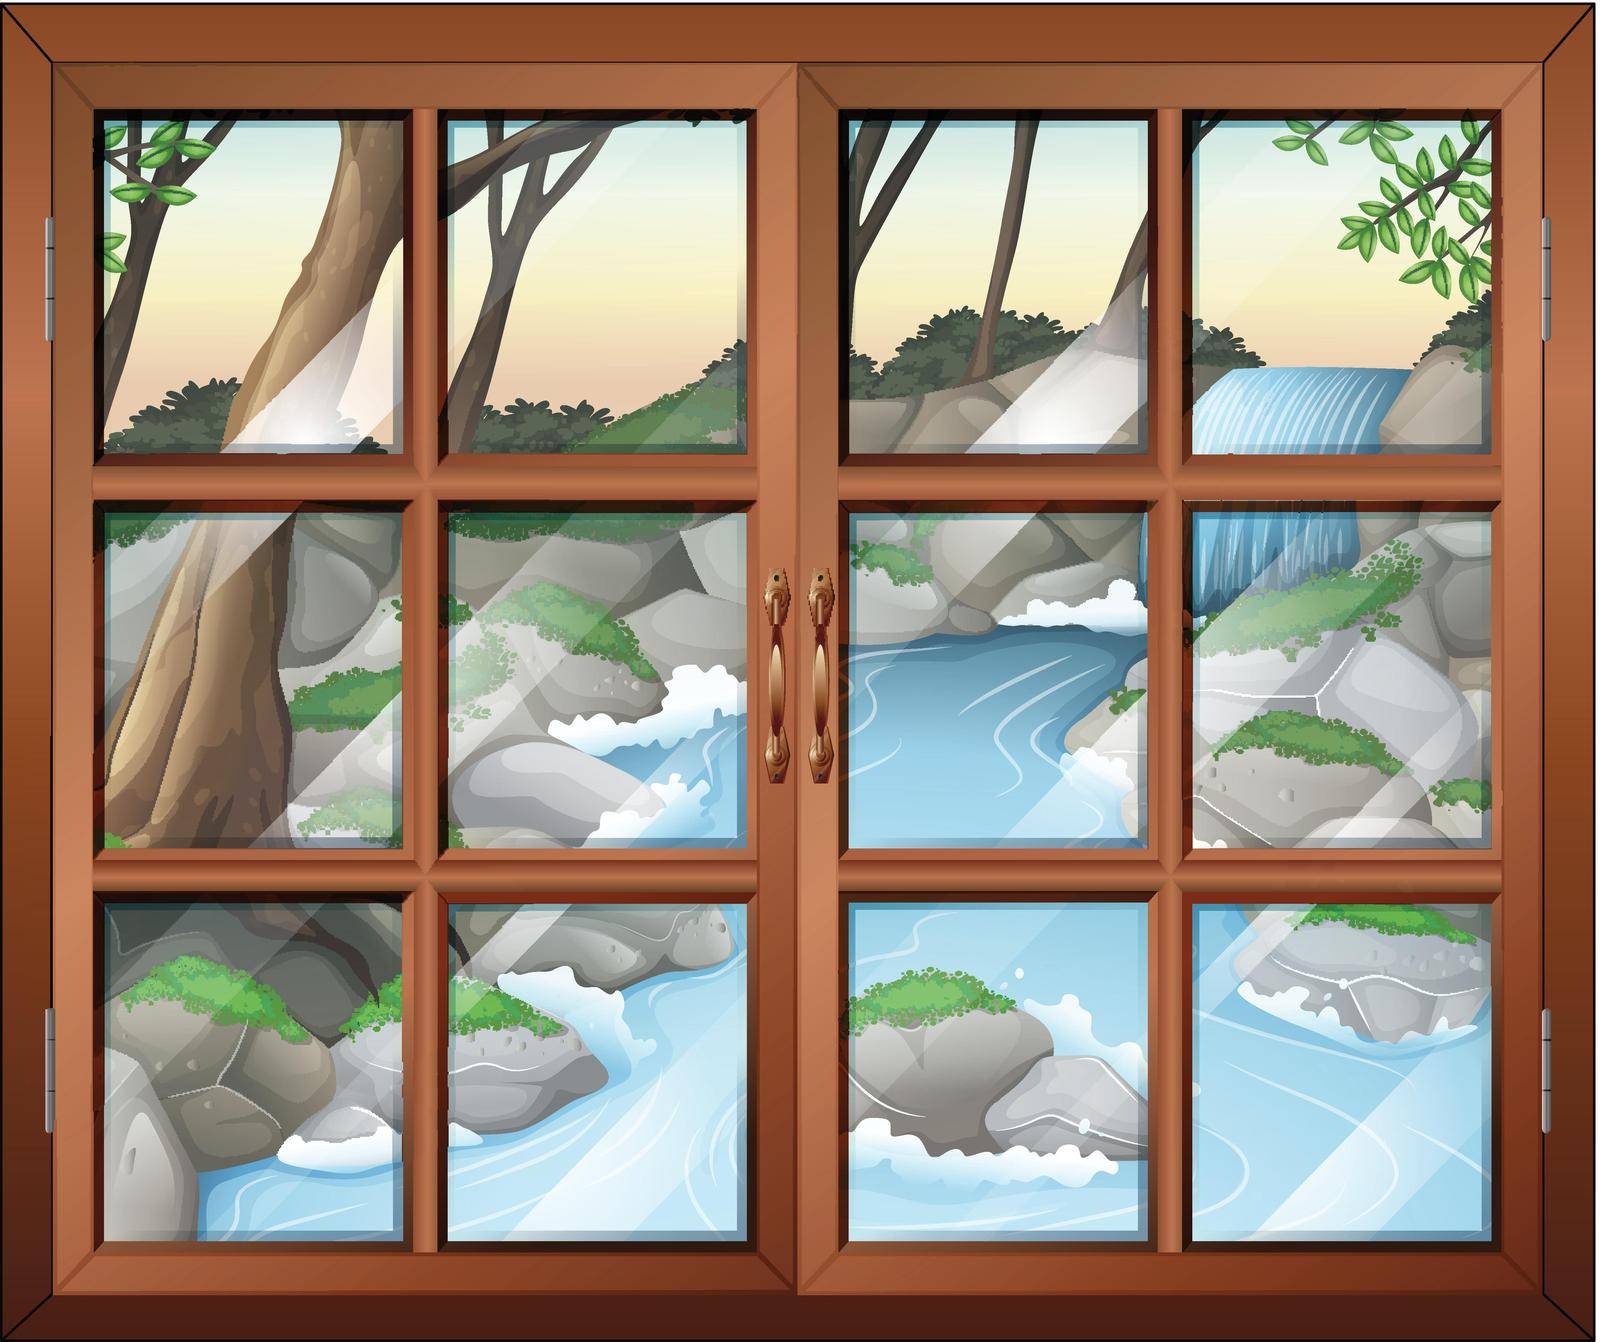 Illustration of a closed window near the waterfall